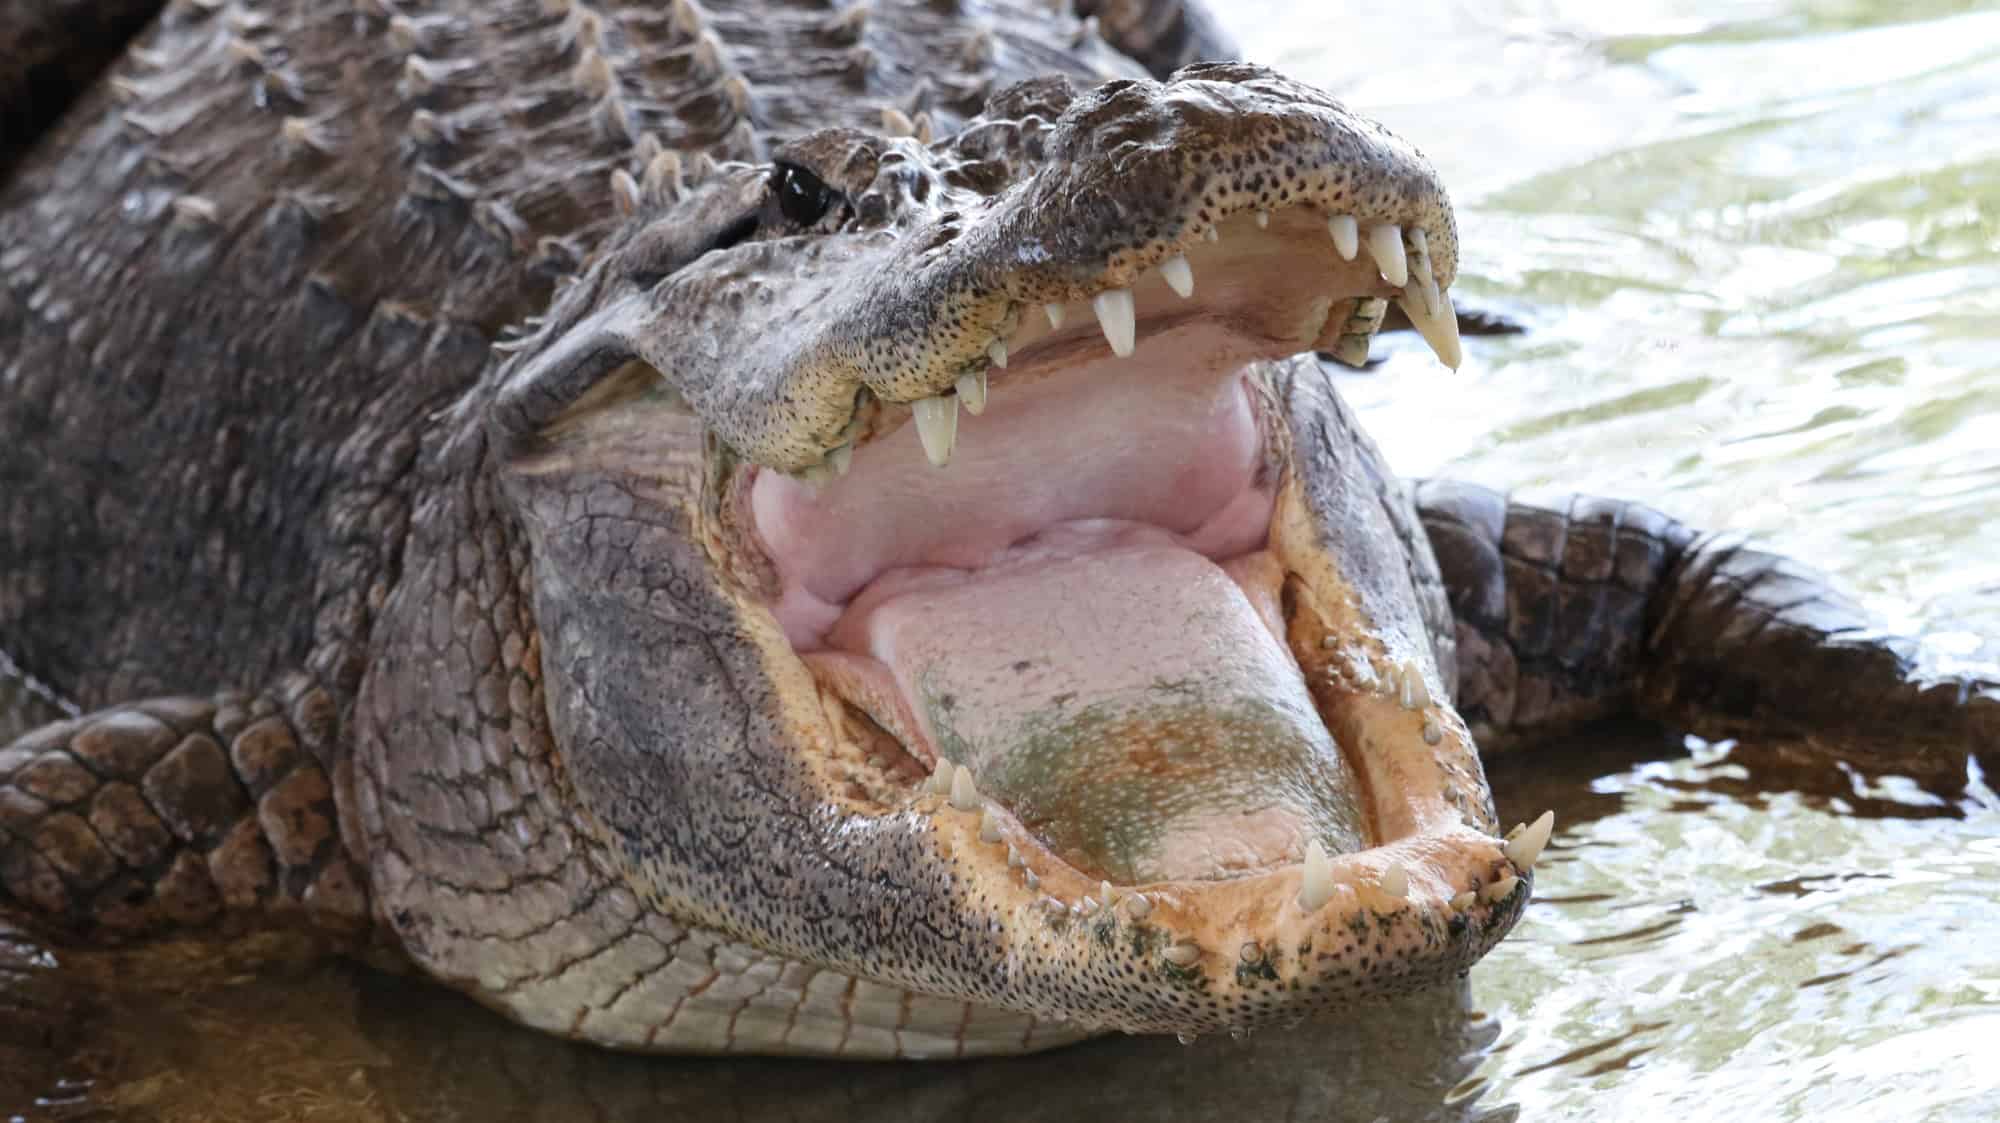 An large alligator look up the see if there are any food ready, with the sharp teeth via DepostiPhotos